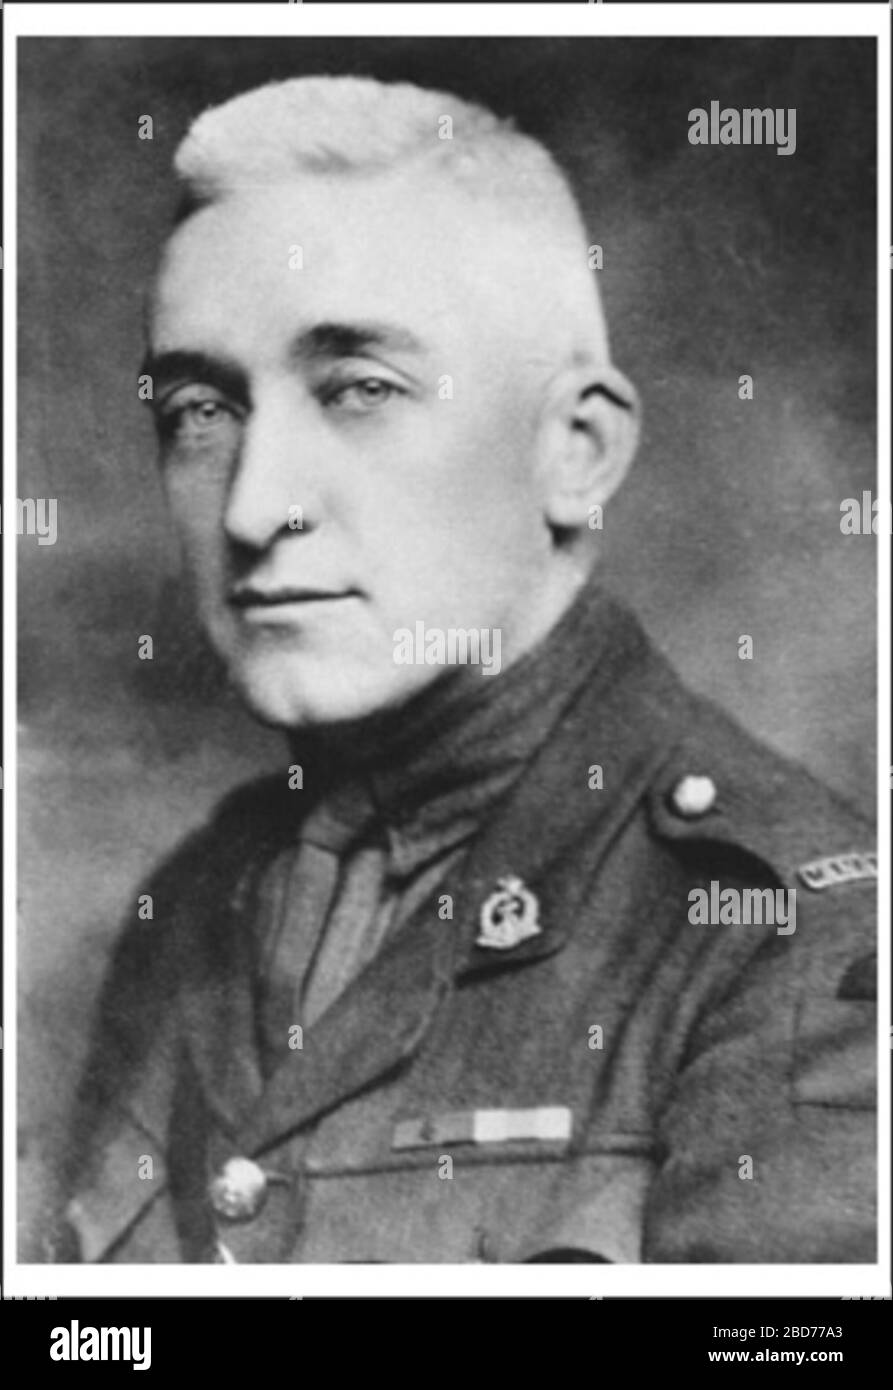 'English: Bellenden Seymour Hutcheson VC; 12 December 2012, 12:50:39; http://www.cmp-cpm.forces.gc.ca/dhh-dhp/gal/vcg-gcv/bio/hutcheson-bs-eng.asp; Unknown author; ' Stock Photo